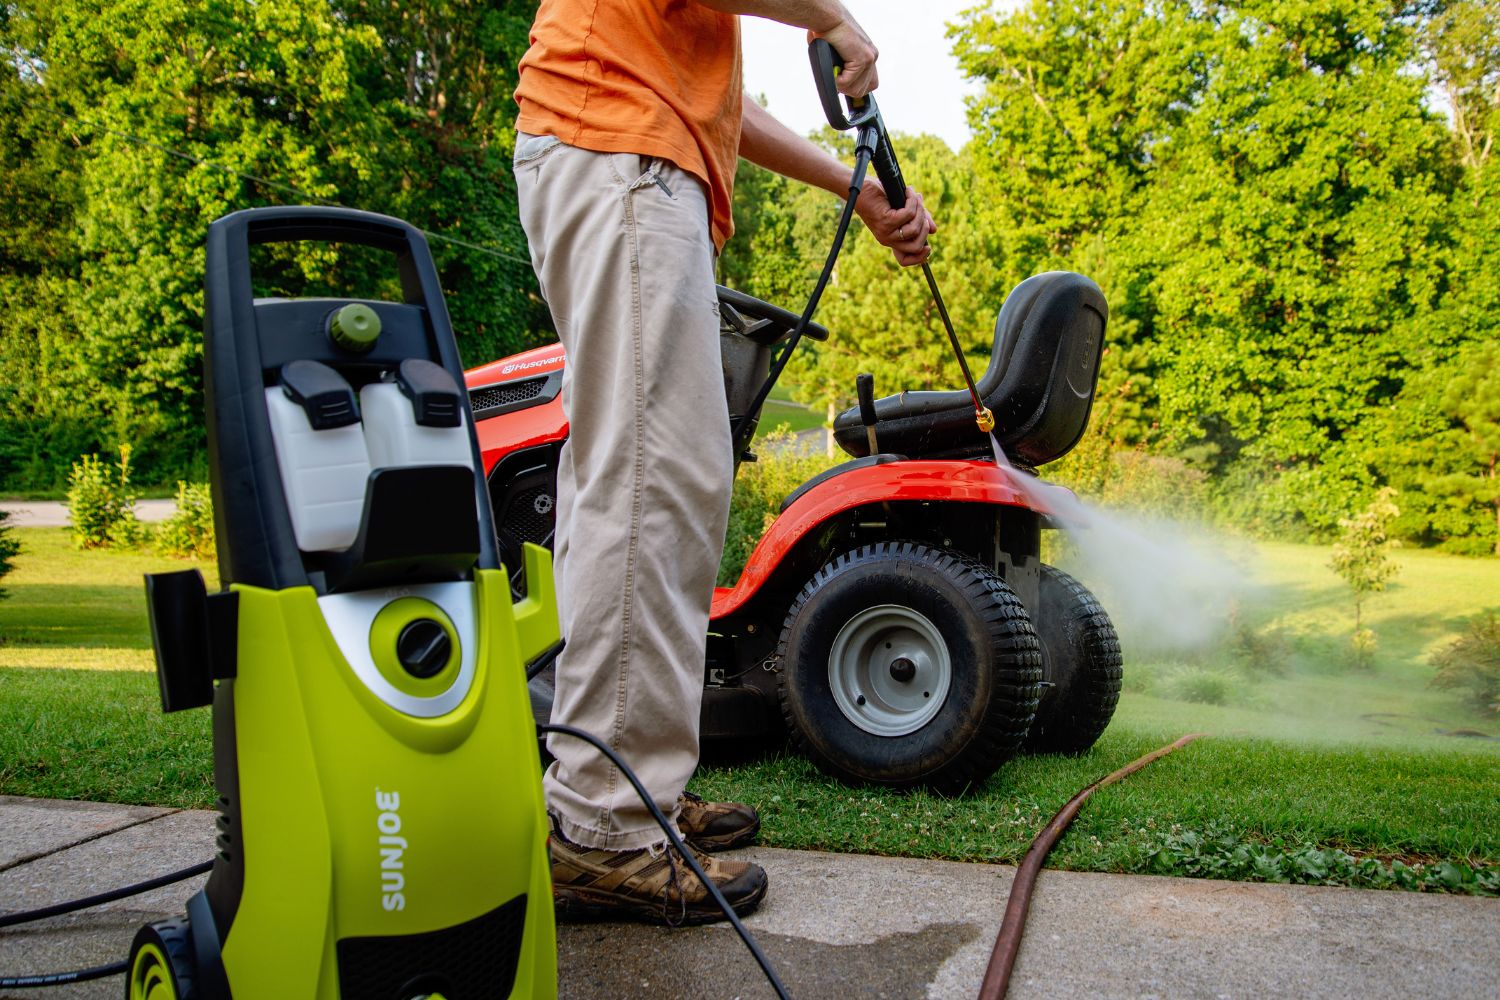 A person using the best electric pressure washer option to clean a riding lawn mower